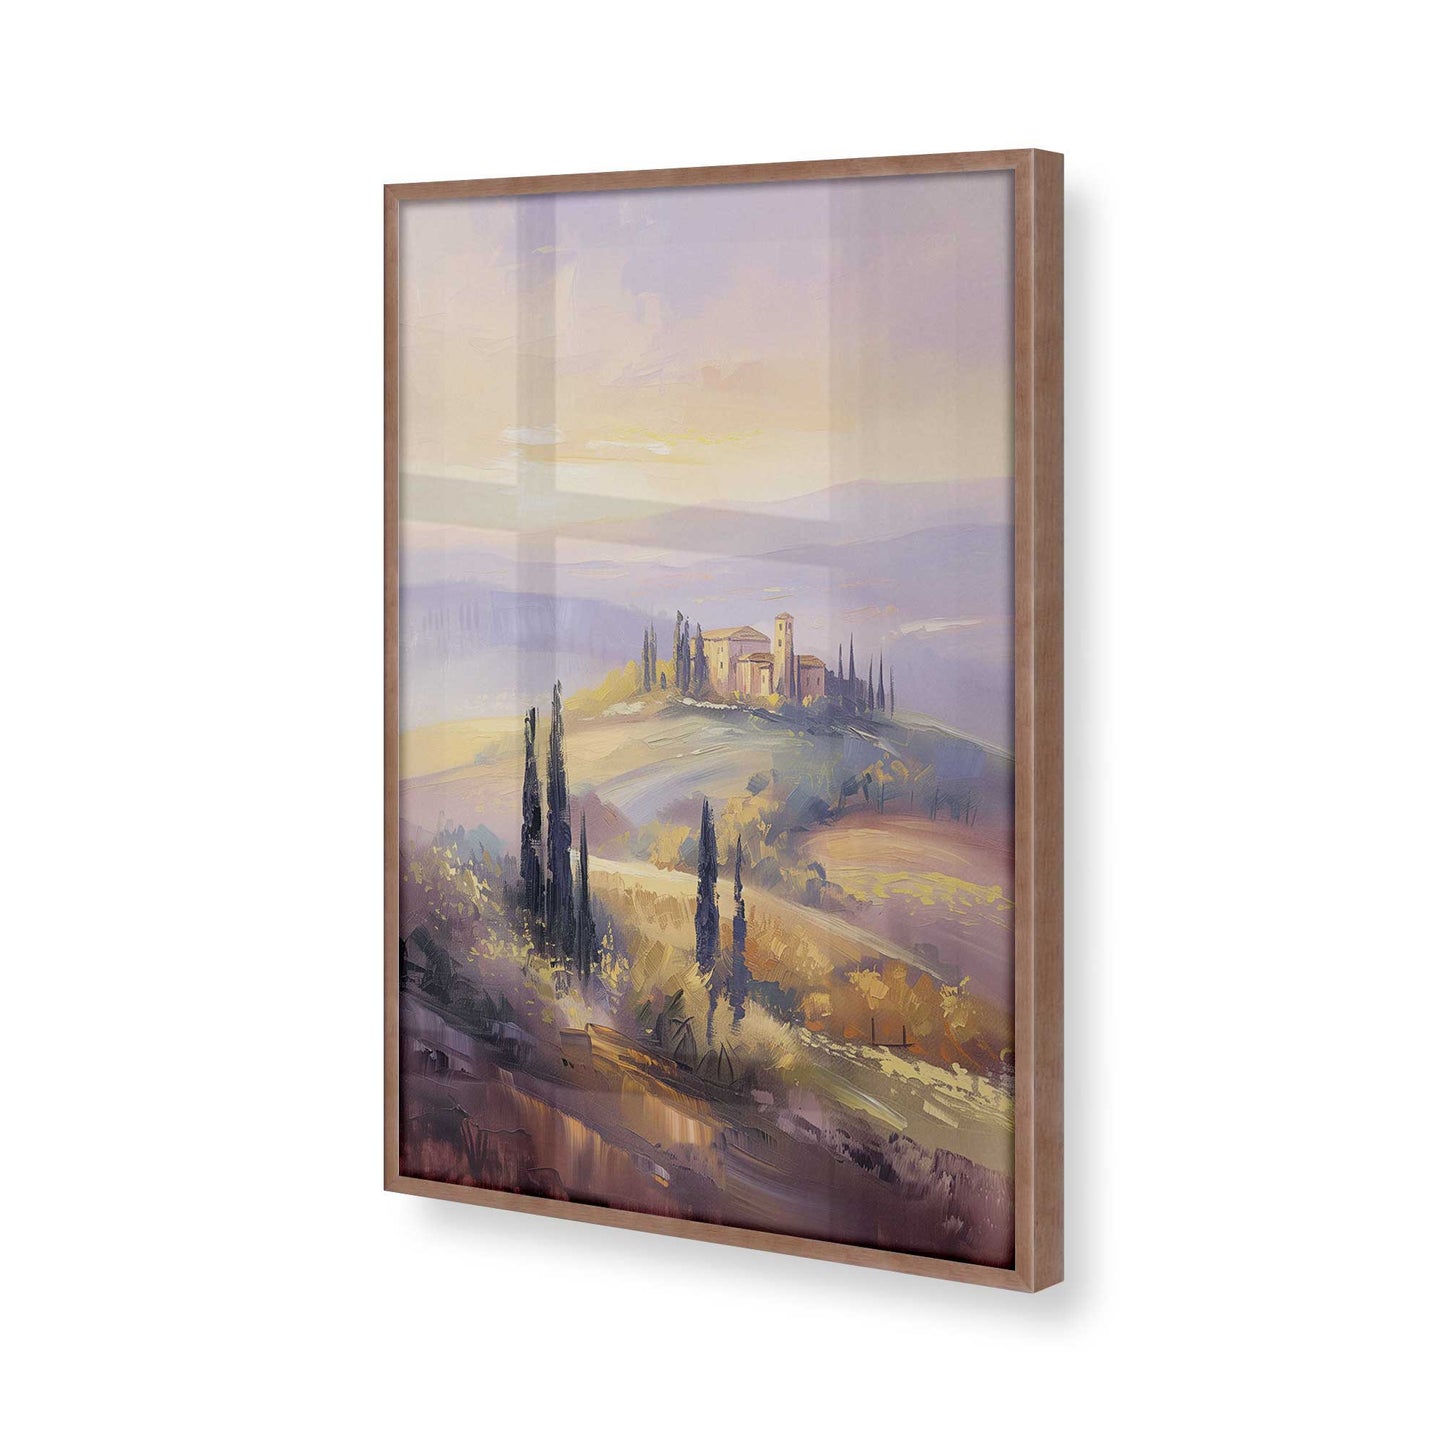 [Color:Powder Rose], Picture of art in a Powder Rose frame at an angle